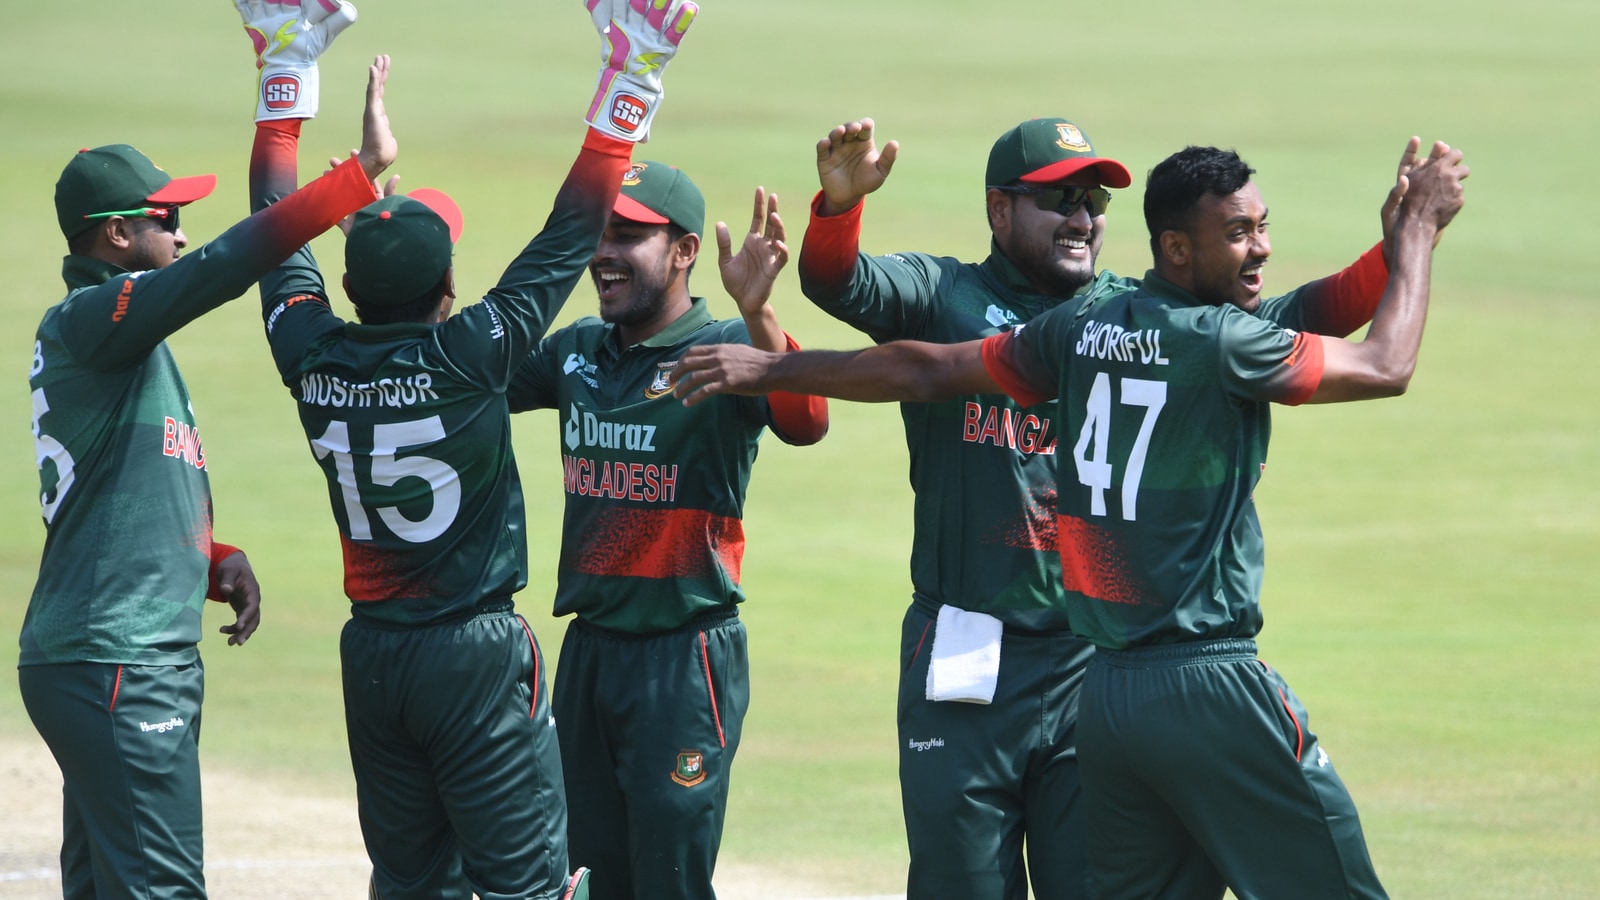 We can fall sick and die Bangladesh cricketers face horror sea voyage in WI Cricket